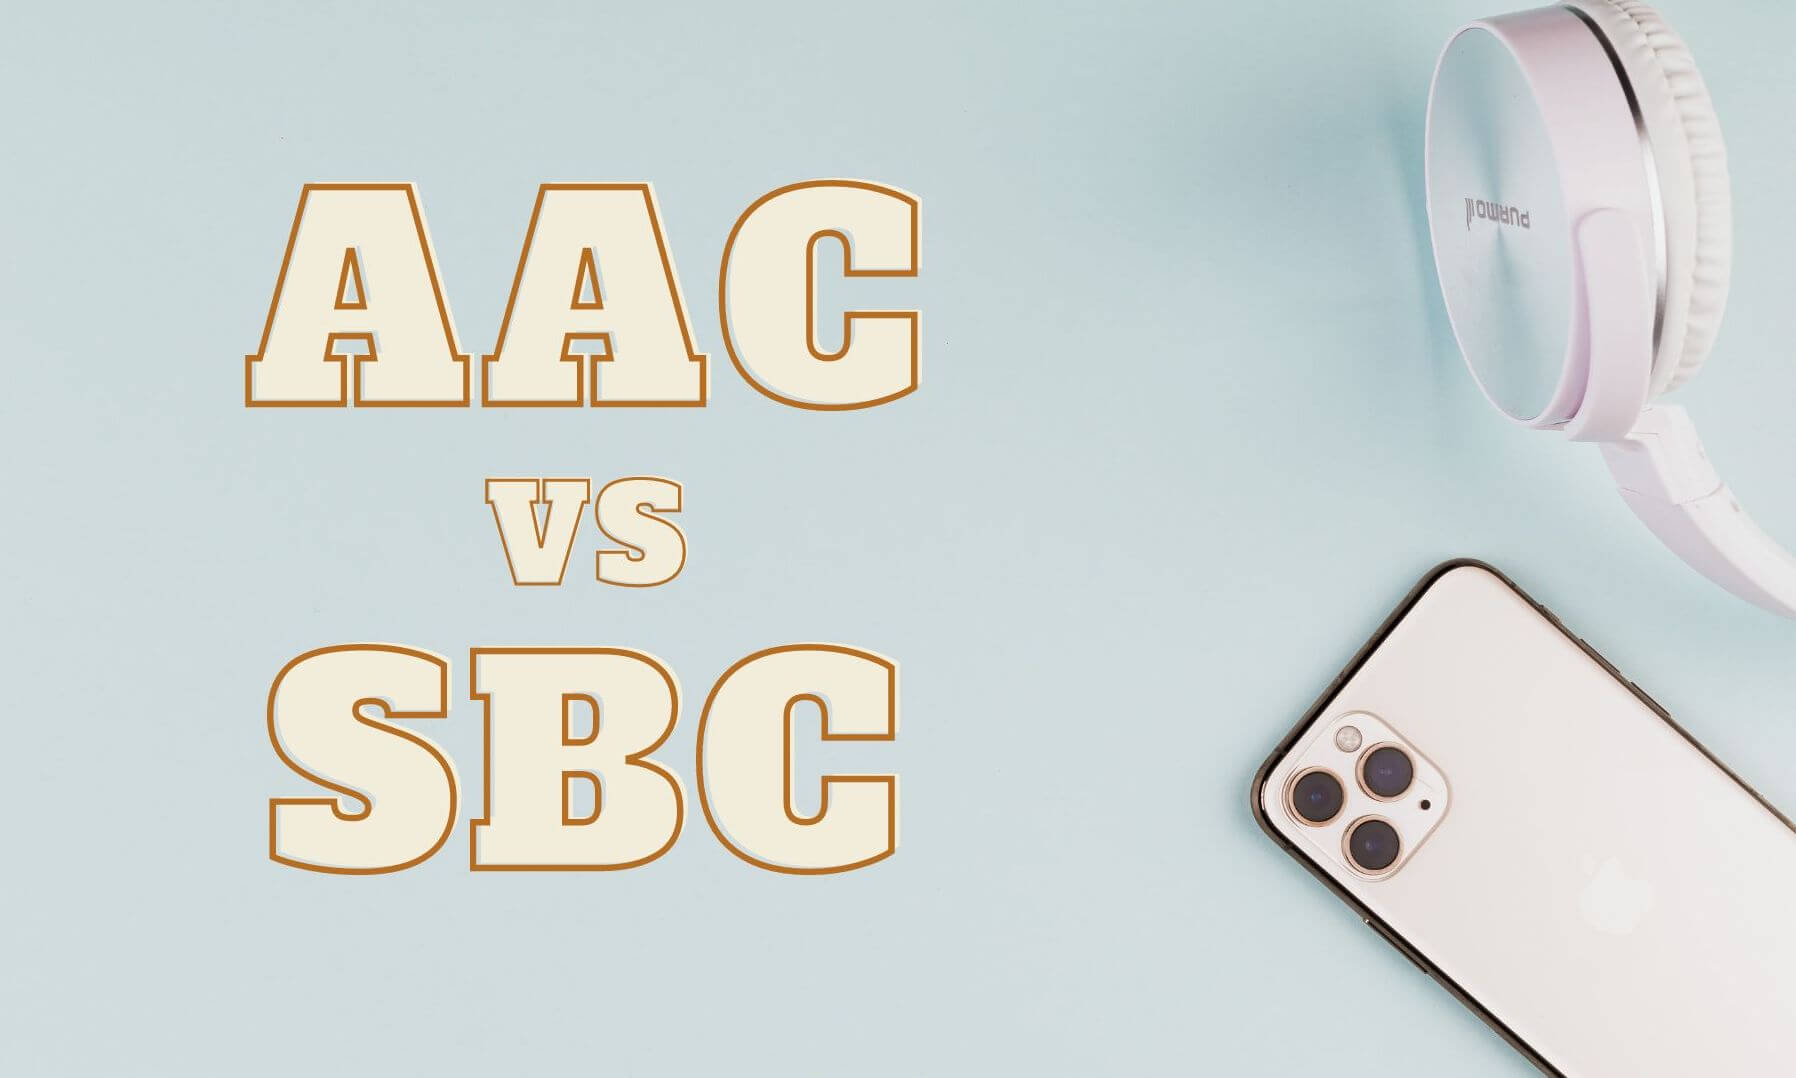 Is AAC better than SBC